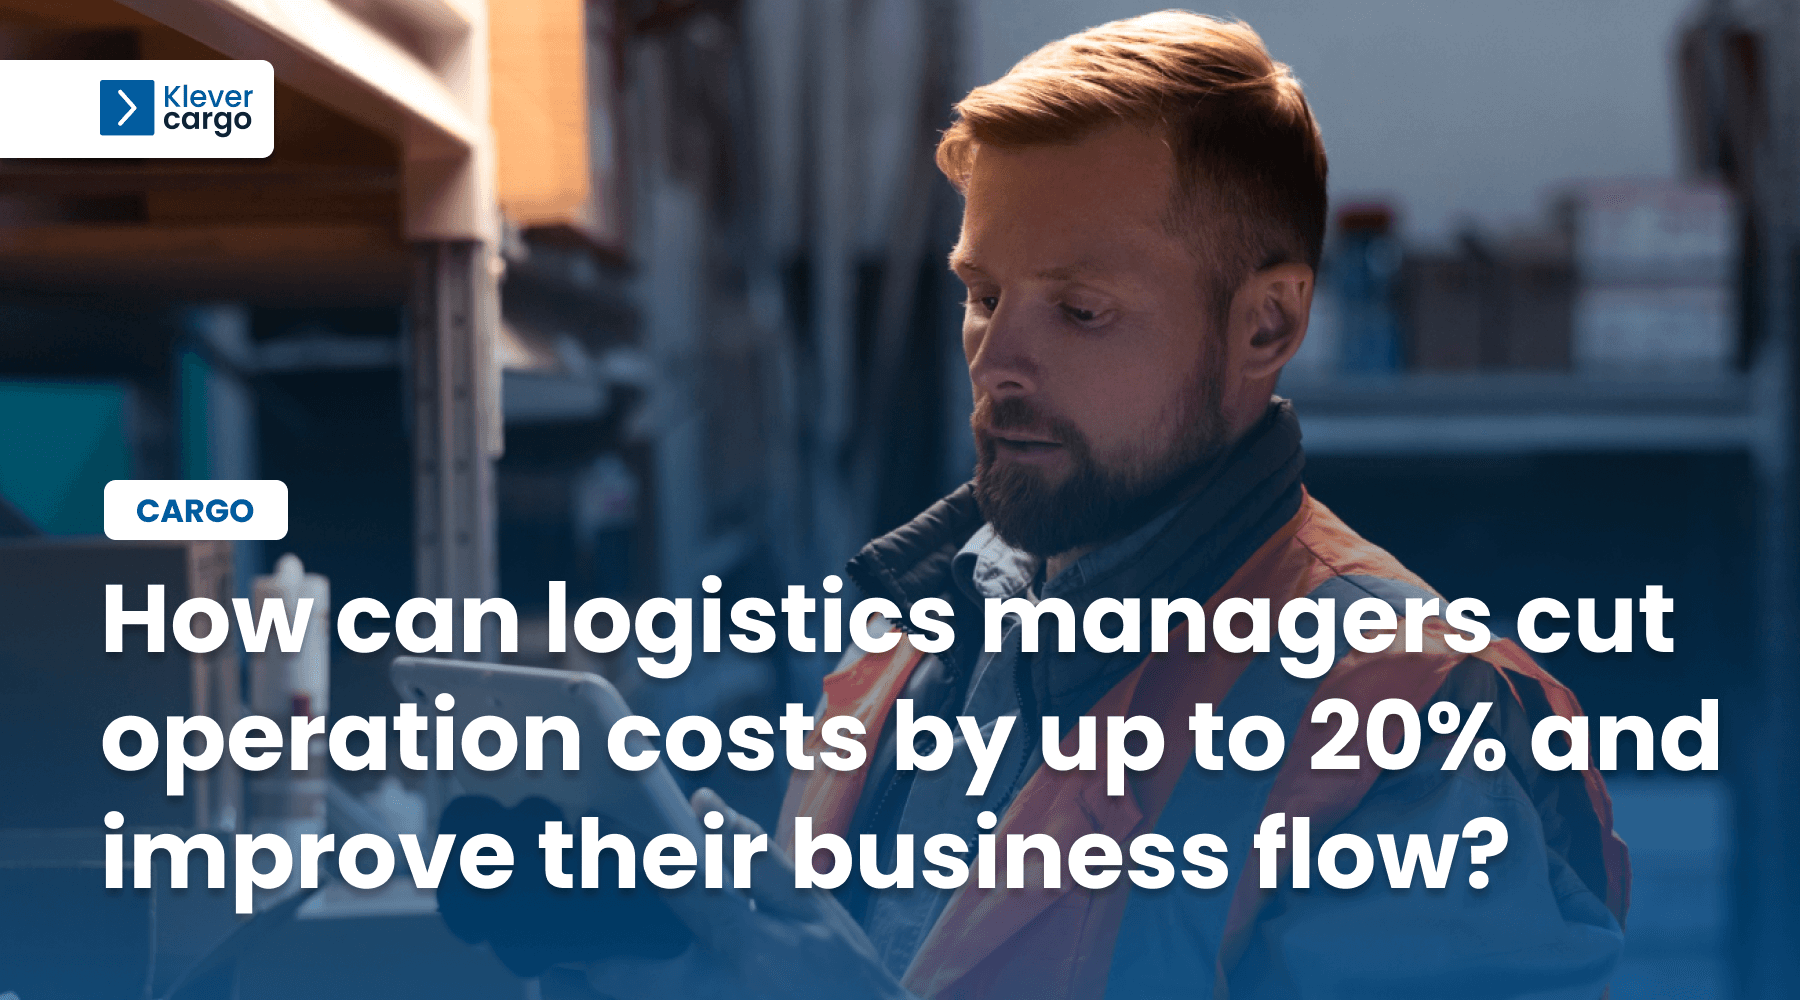 How can logistics managers cut operation costs by up to 20% and improve their business flow?